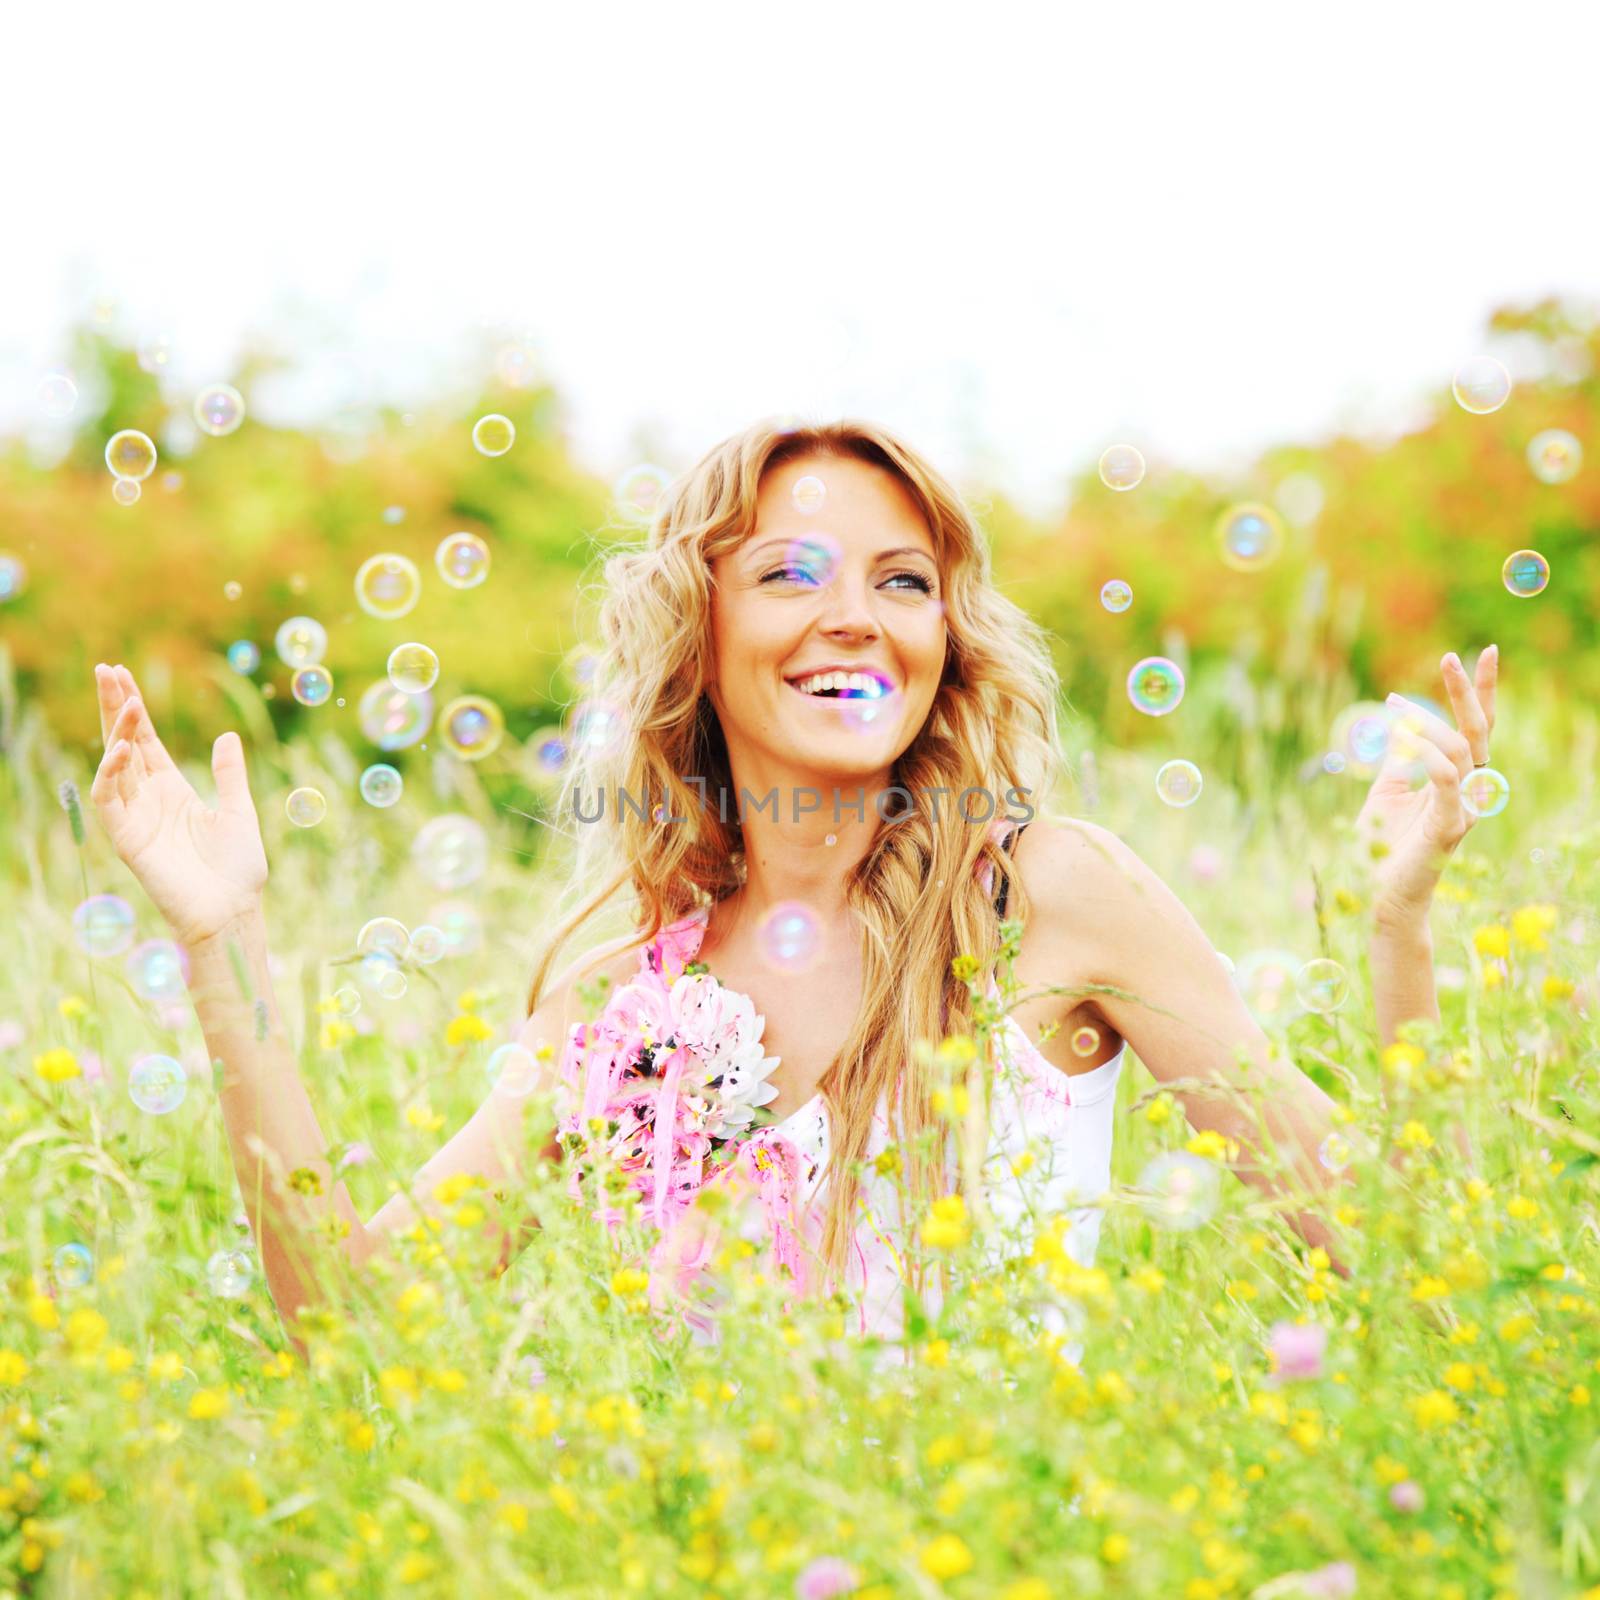 Blonde girl starts soap bubbles and smiling in a green spring field